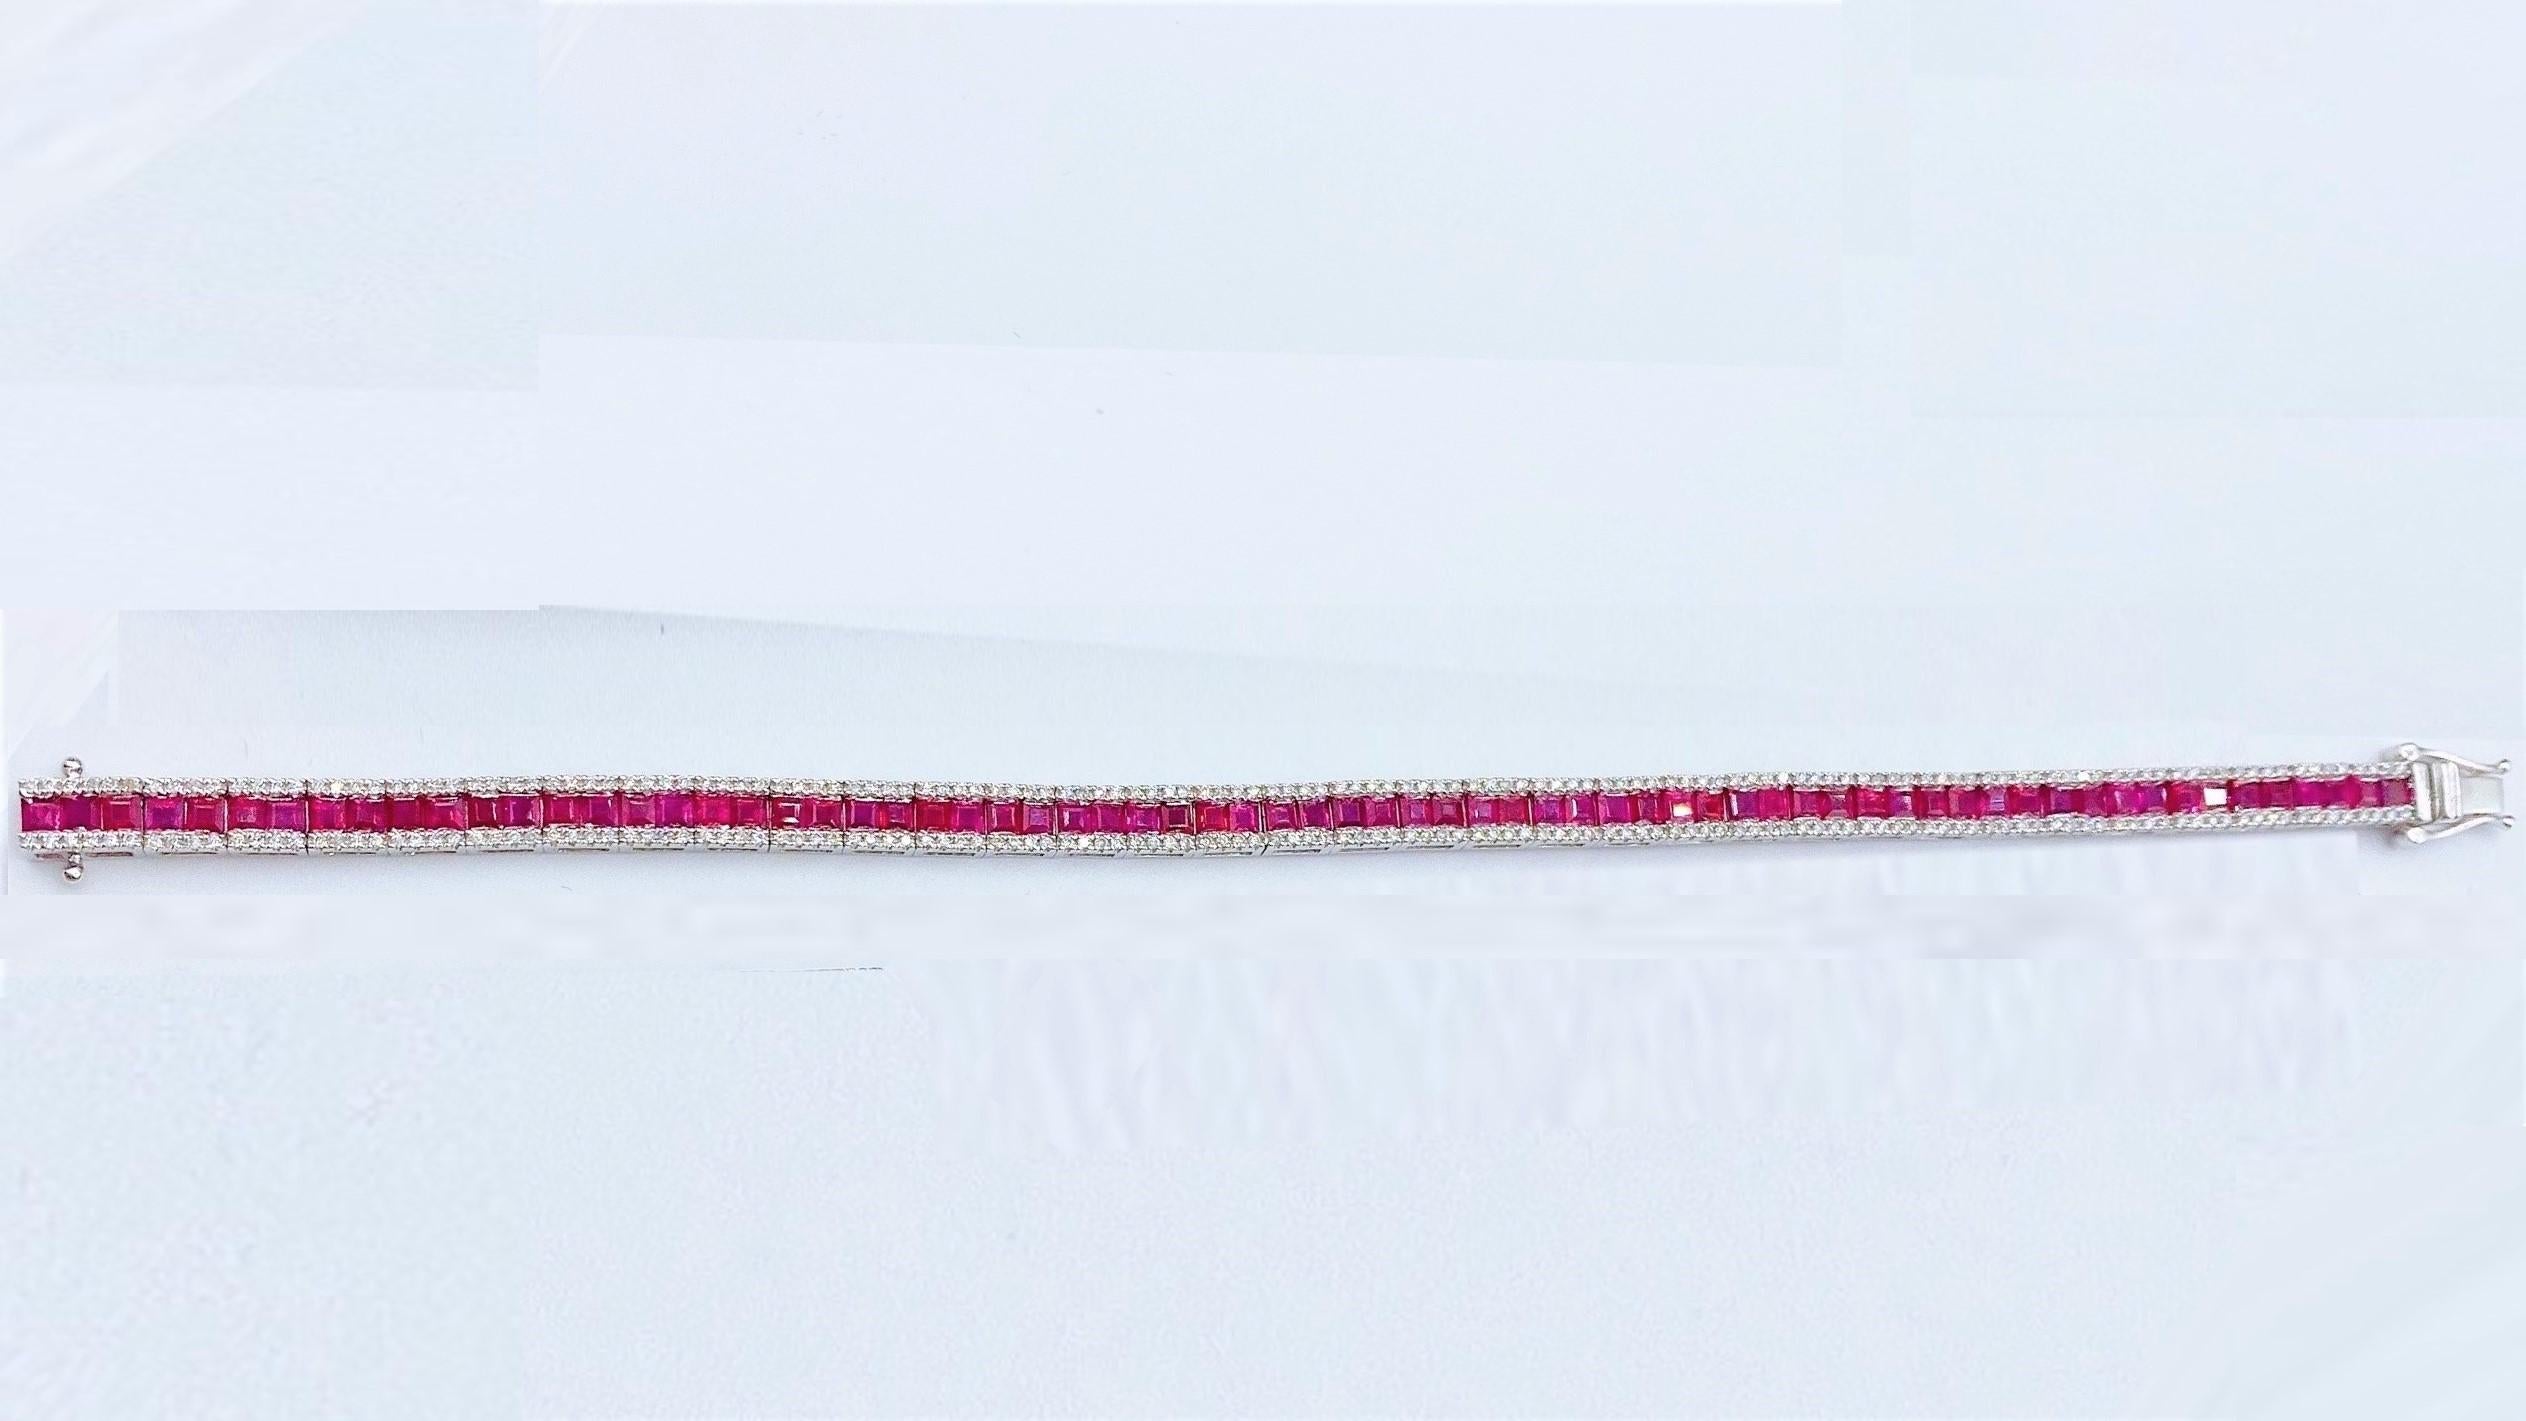 The Following Item we are offering is this Beautiful Rare Important 18KT Gold Sparkling Princess Cut Ruby and Diamond Bracelet. FEATURING Magnificent Rare Gorgeous Fancy Princess Cut Rubies Framed with Diamonds!!! 
The Diamonds and Rubies are of